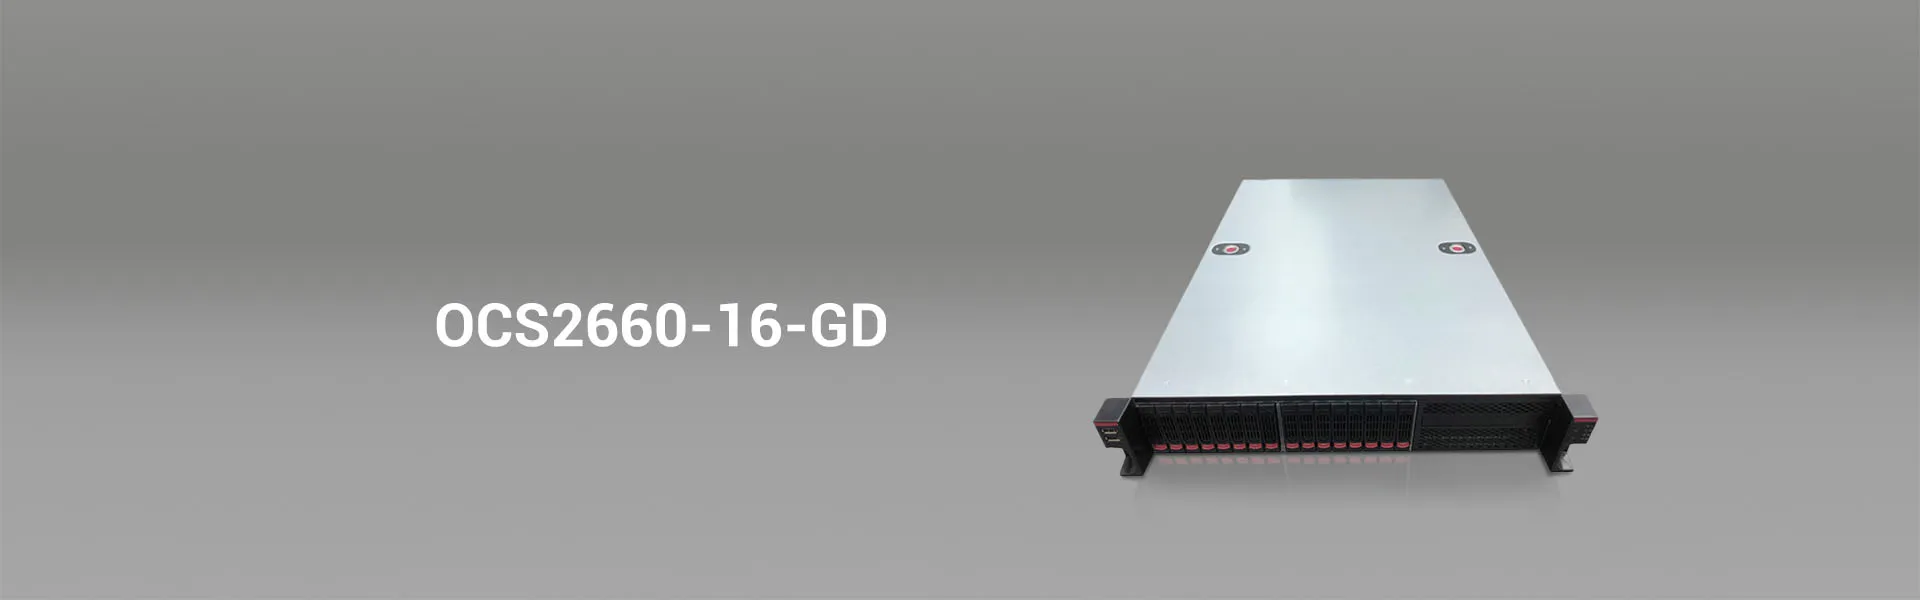 2U Hot-swap chassis - OCS2660-16-GD-onechassis